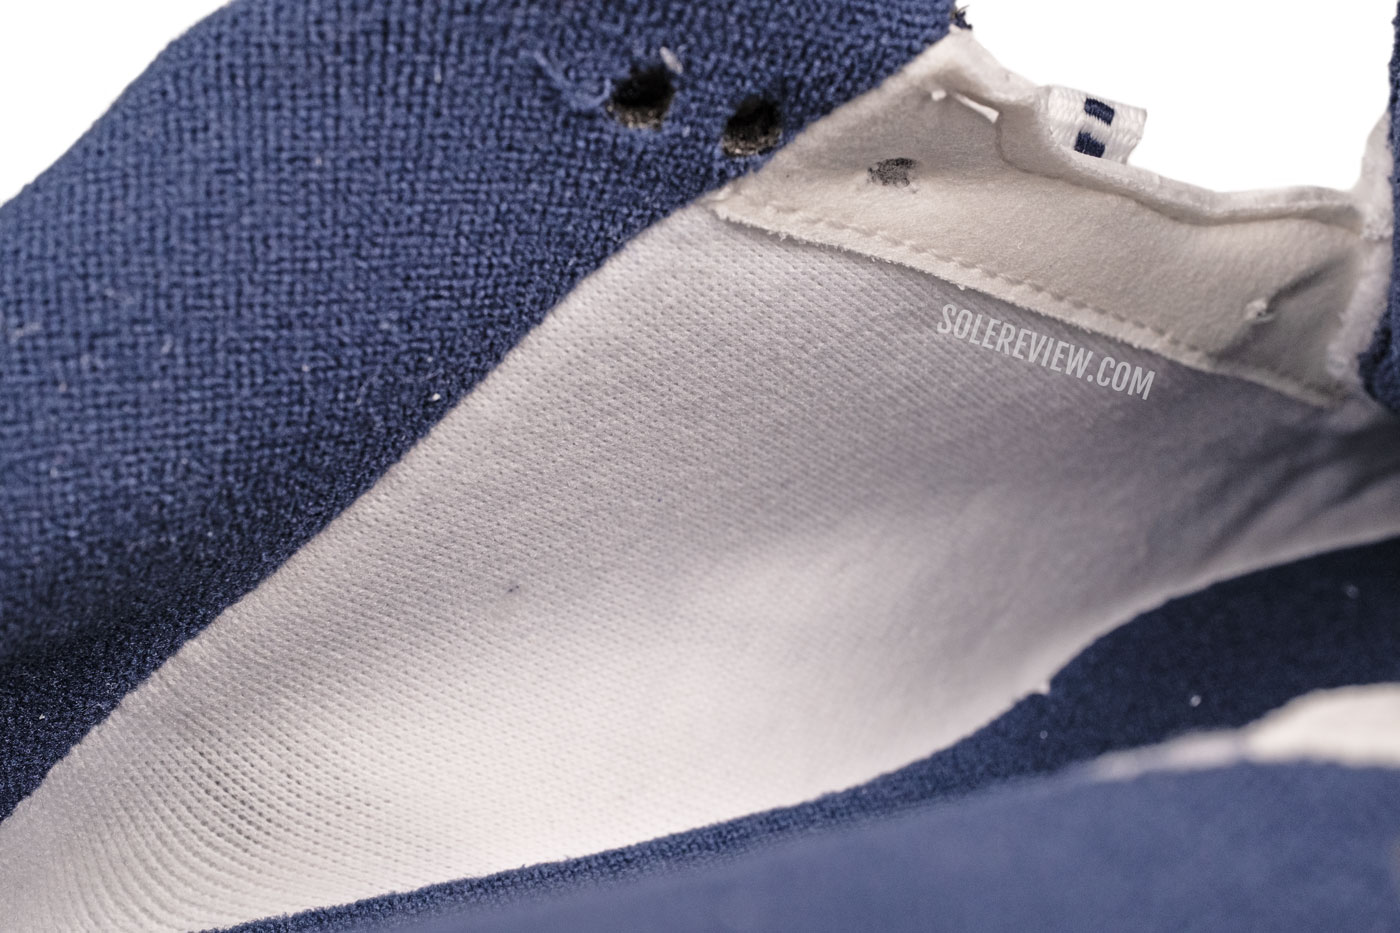 The midfoot lining of the Nike Monarch IV.